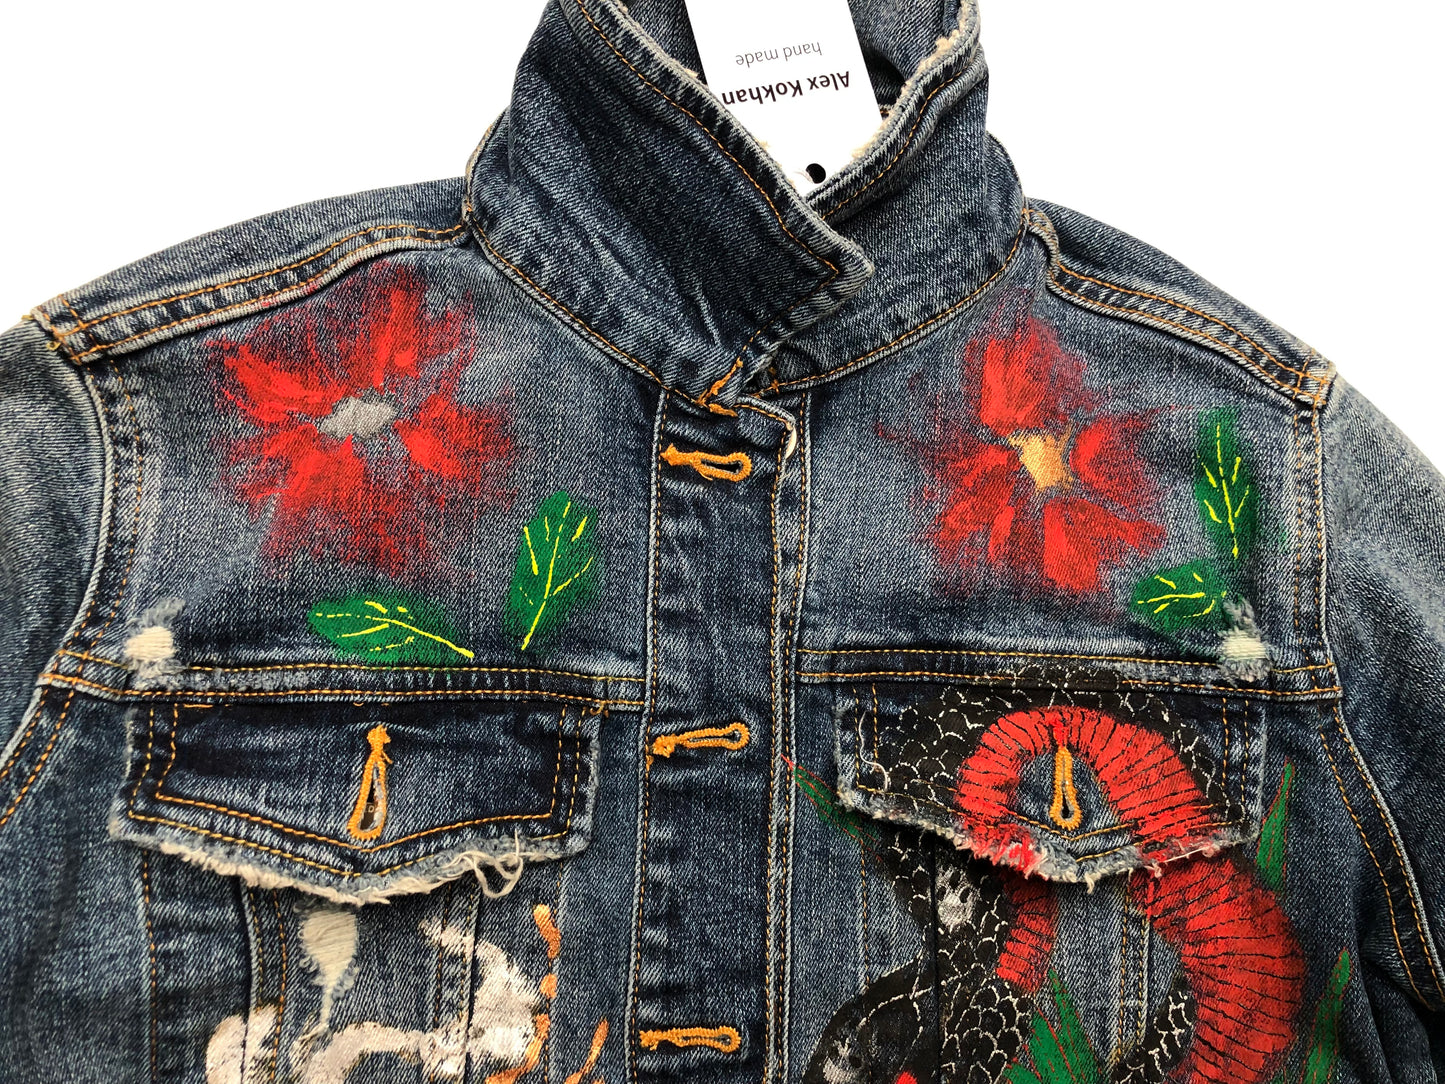 The upper front of the yakuza shooter denim jacket mural